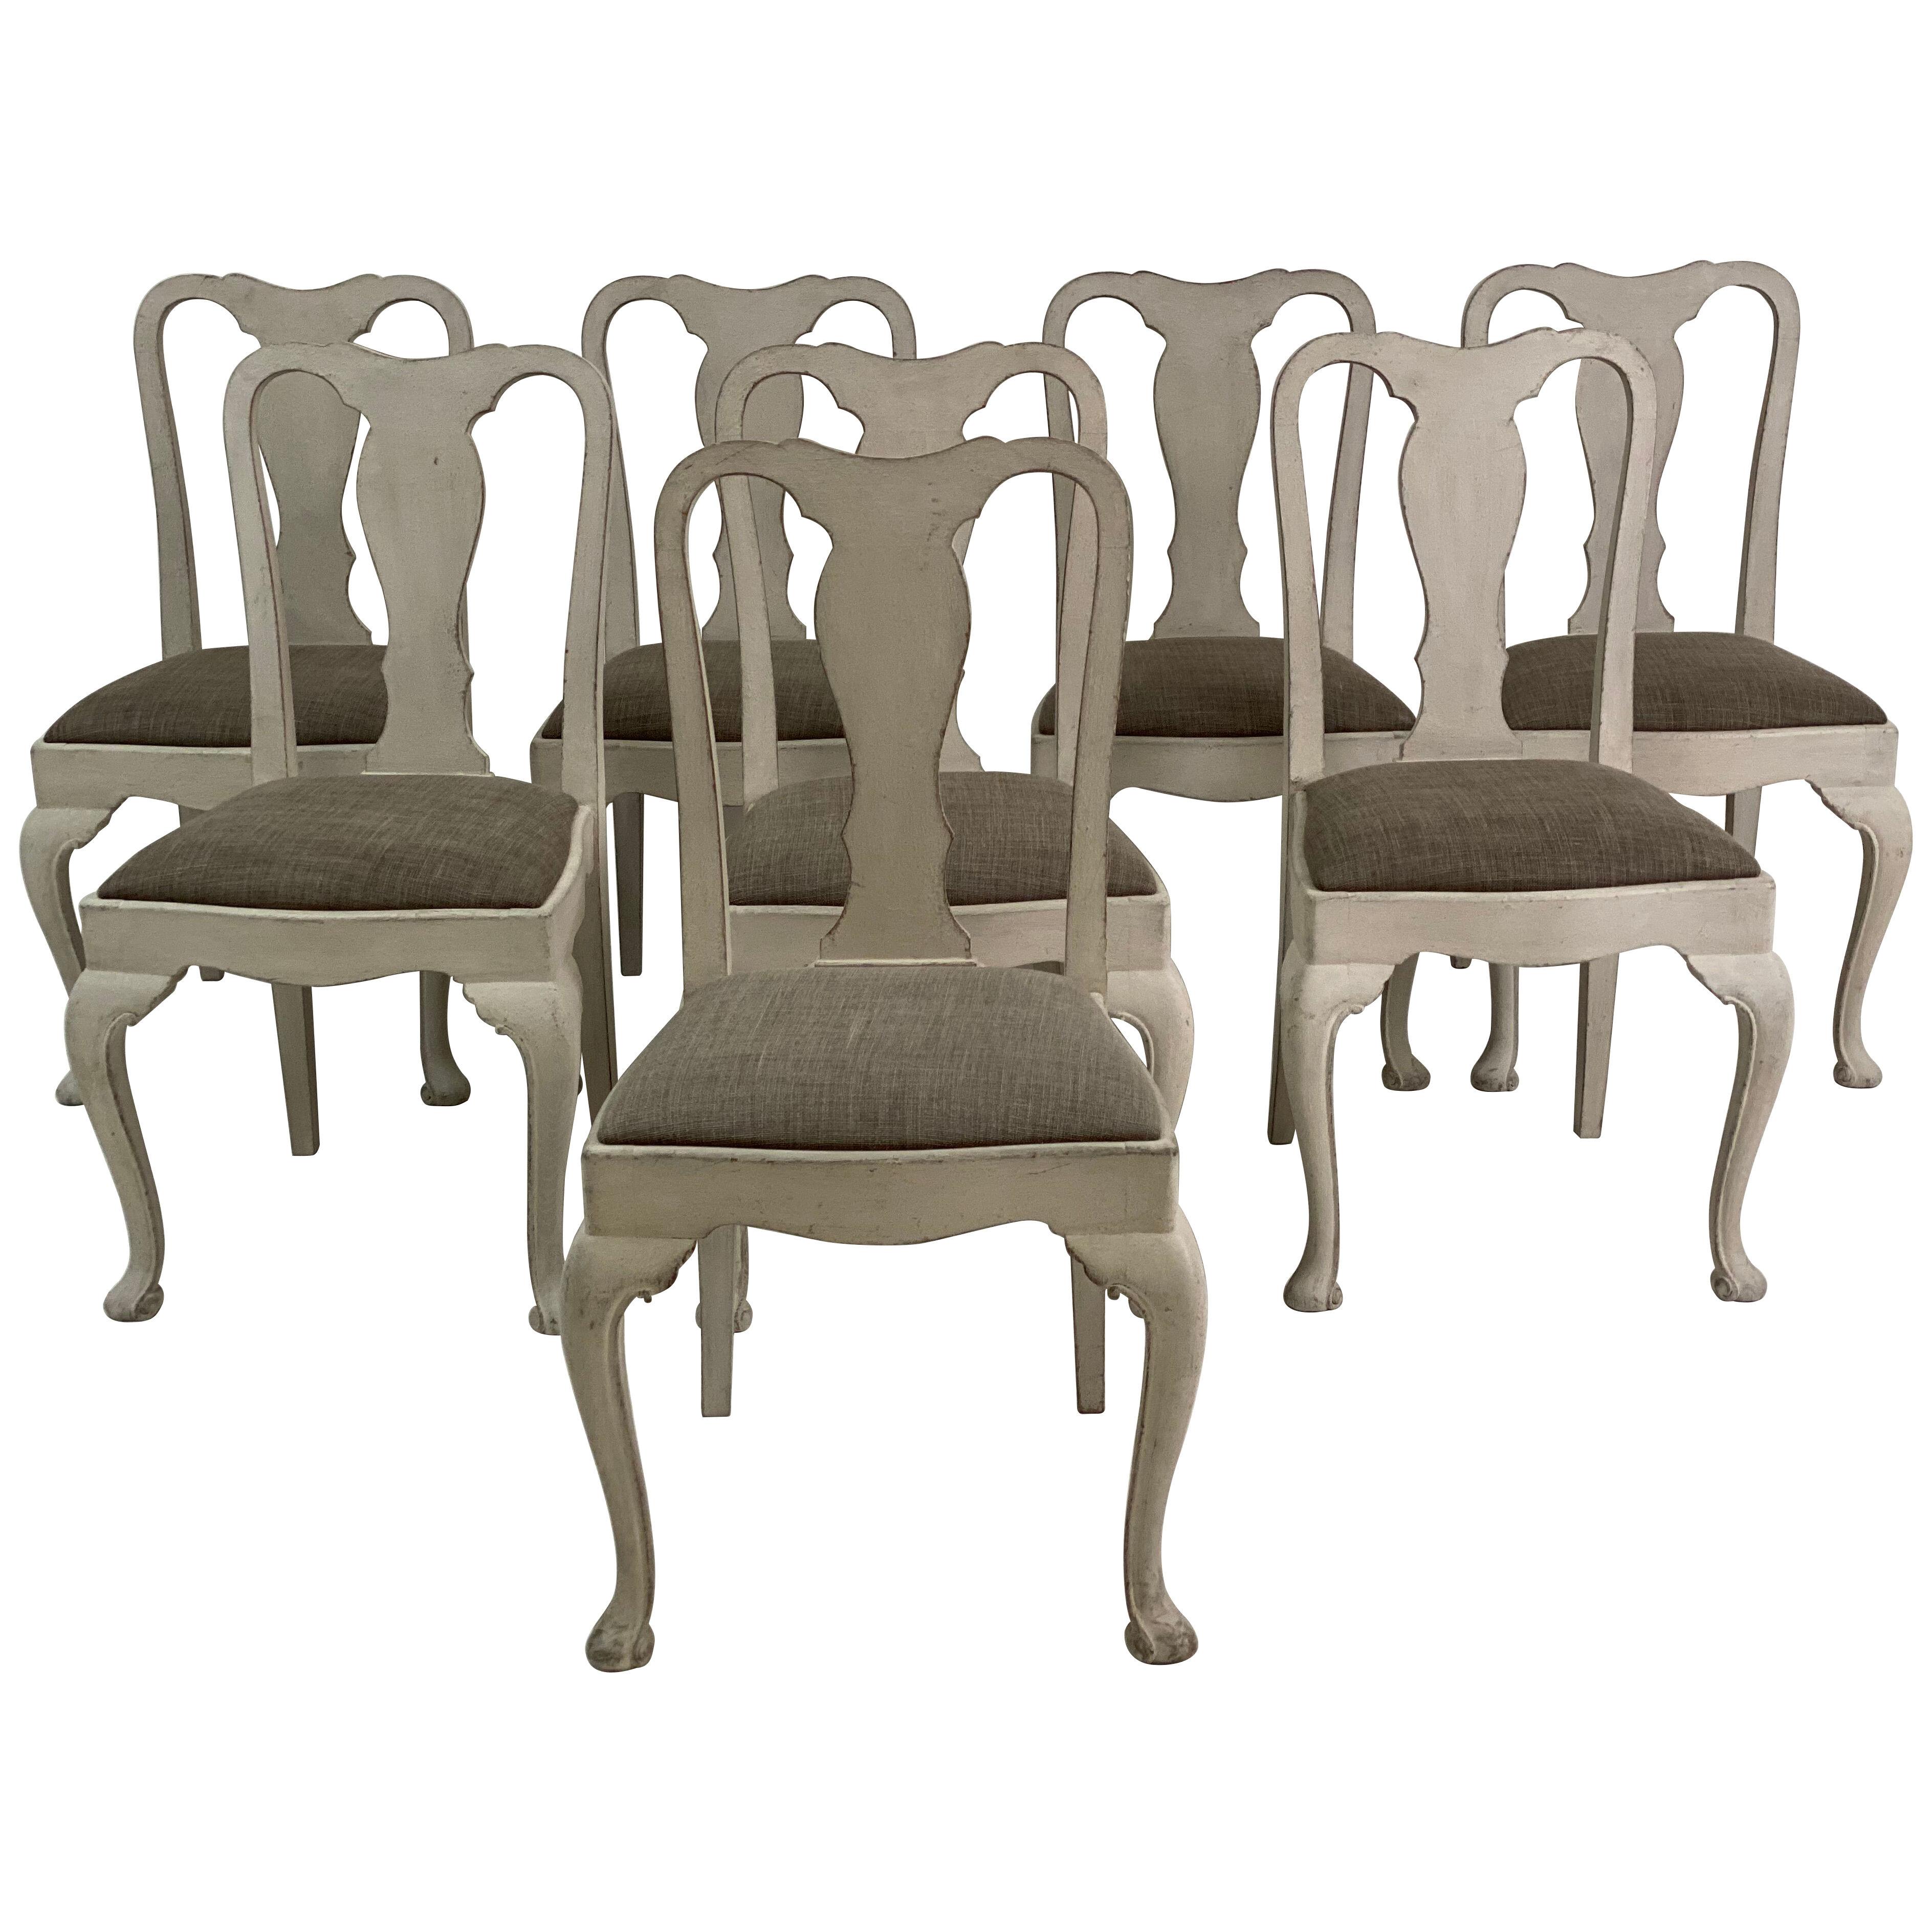 Set of 8 Swedish Patinated Chairs in Nice Cream/Beige color